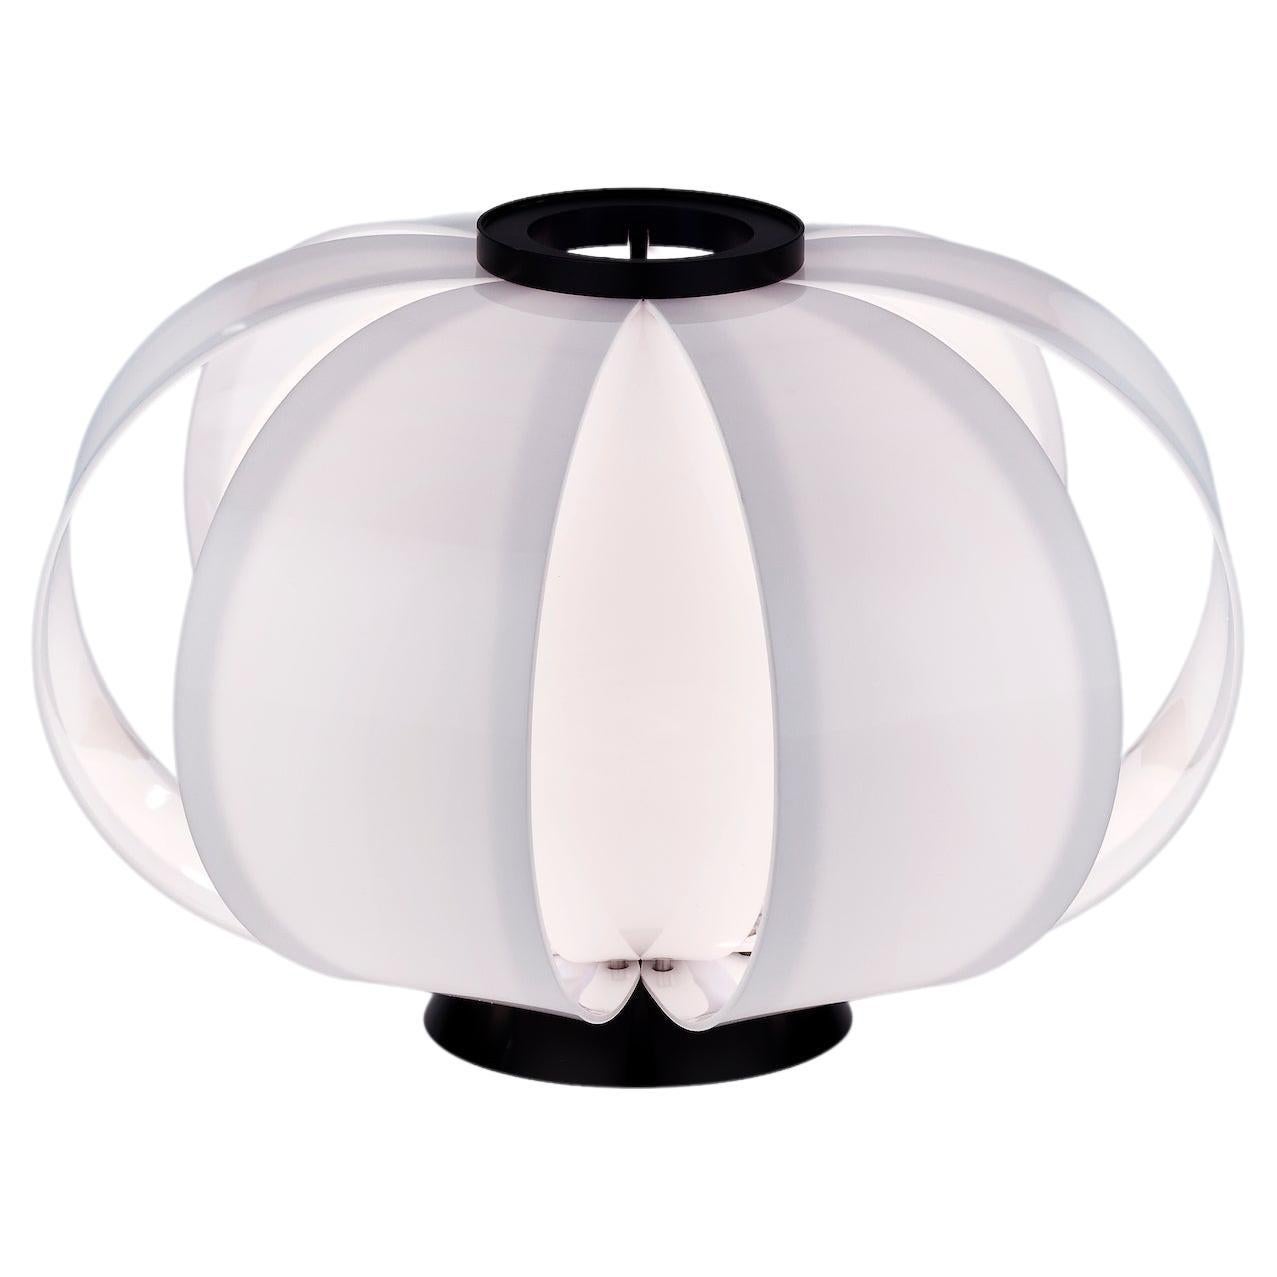 J.A. Coderch 'Disa Mini' Table Lamp in White for Tunds For Sale